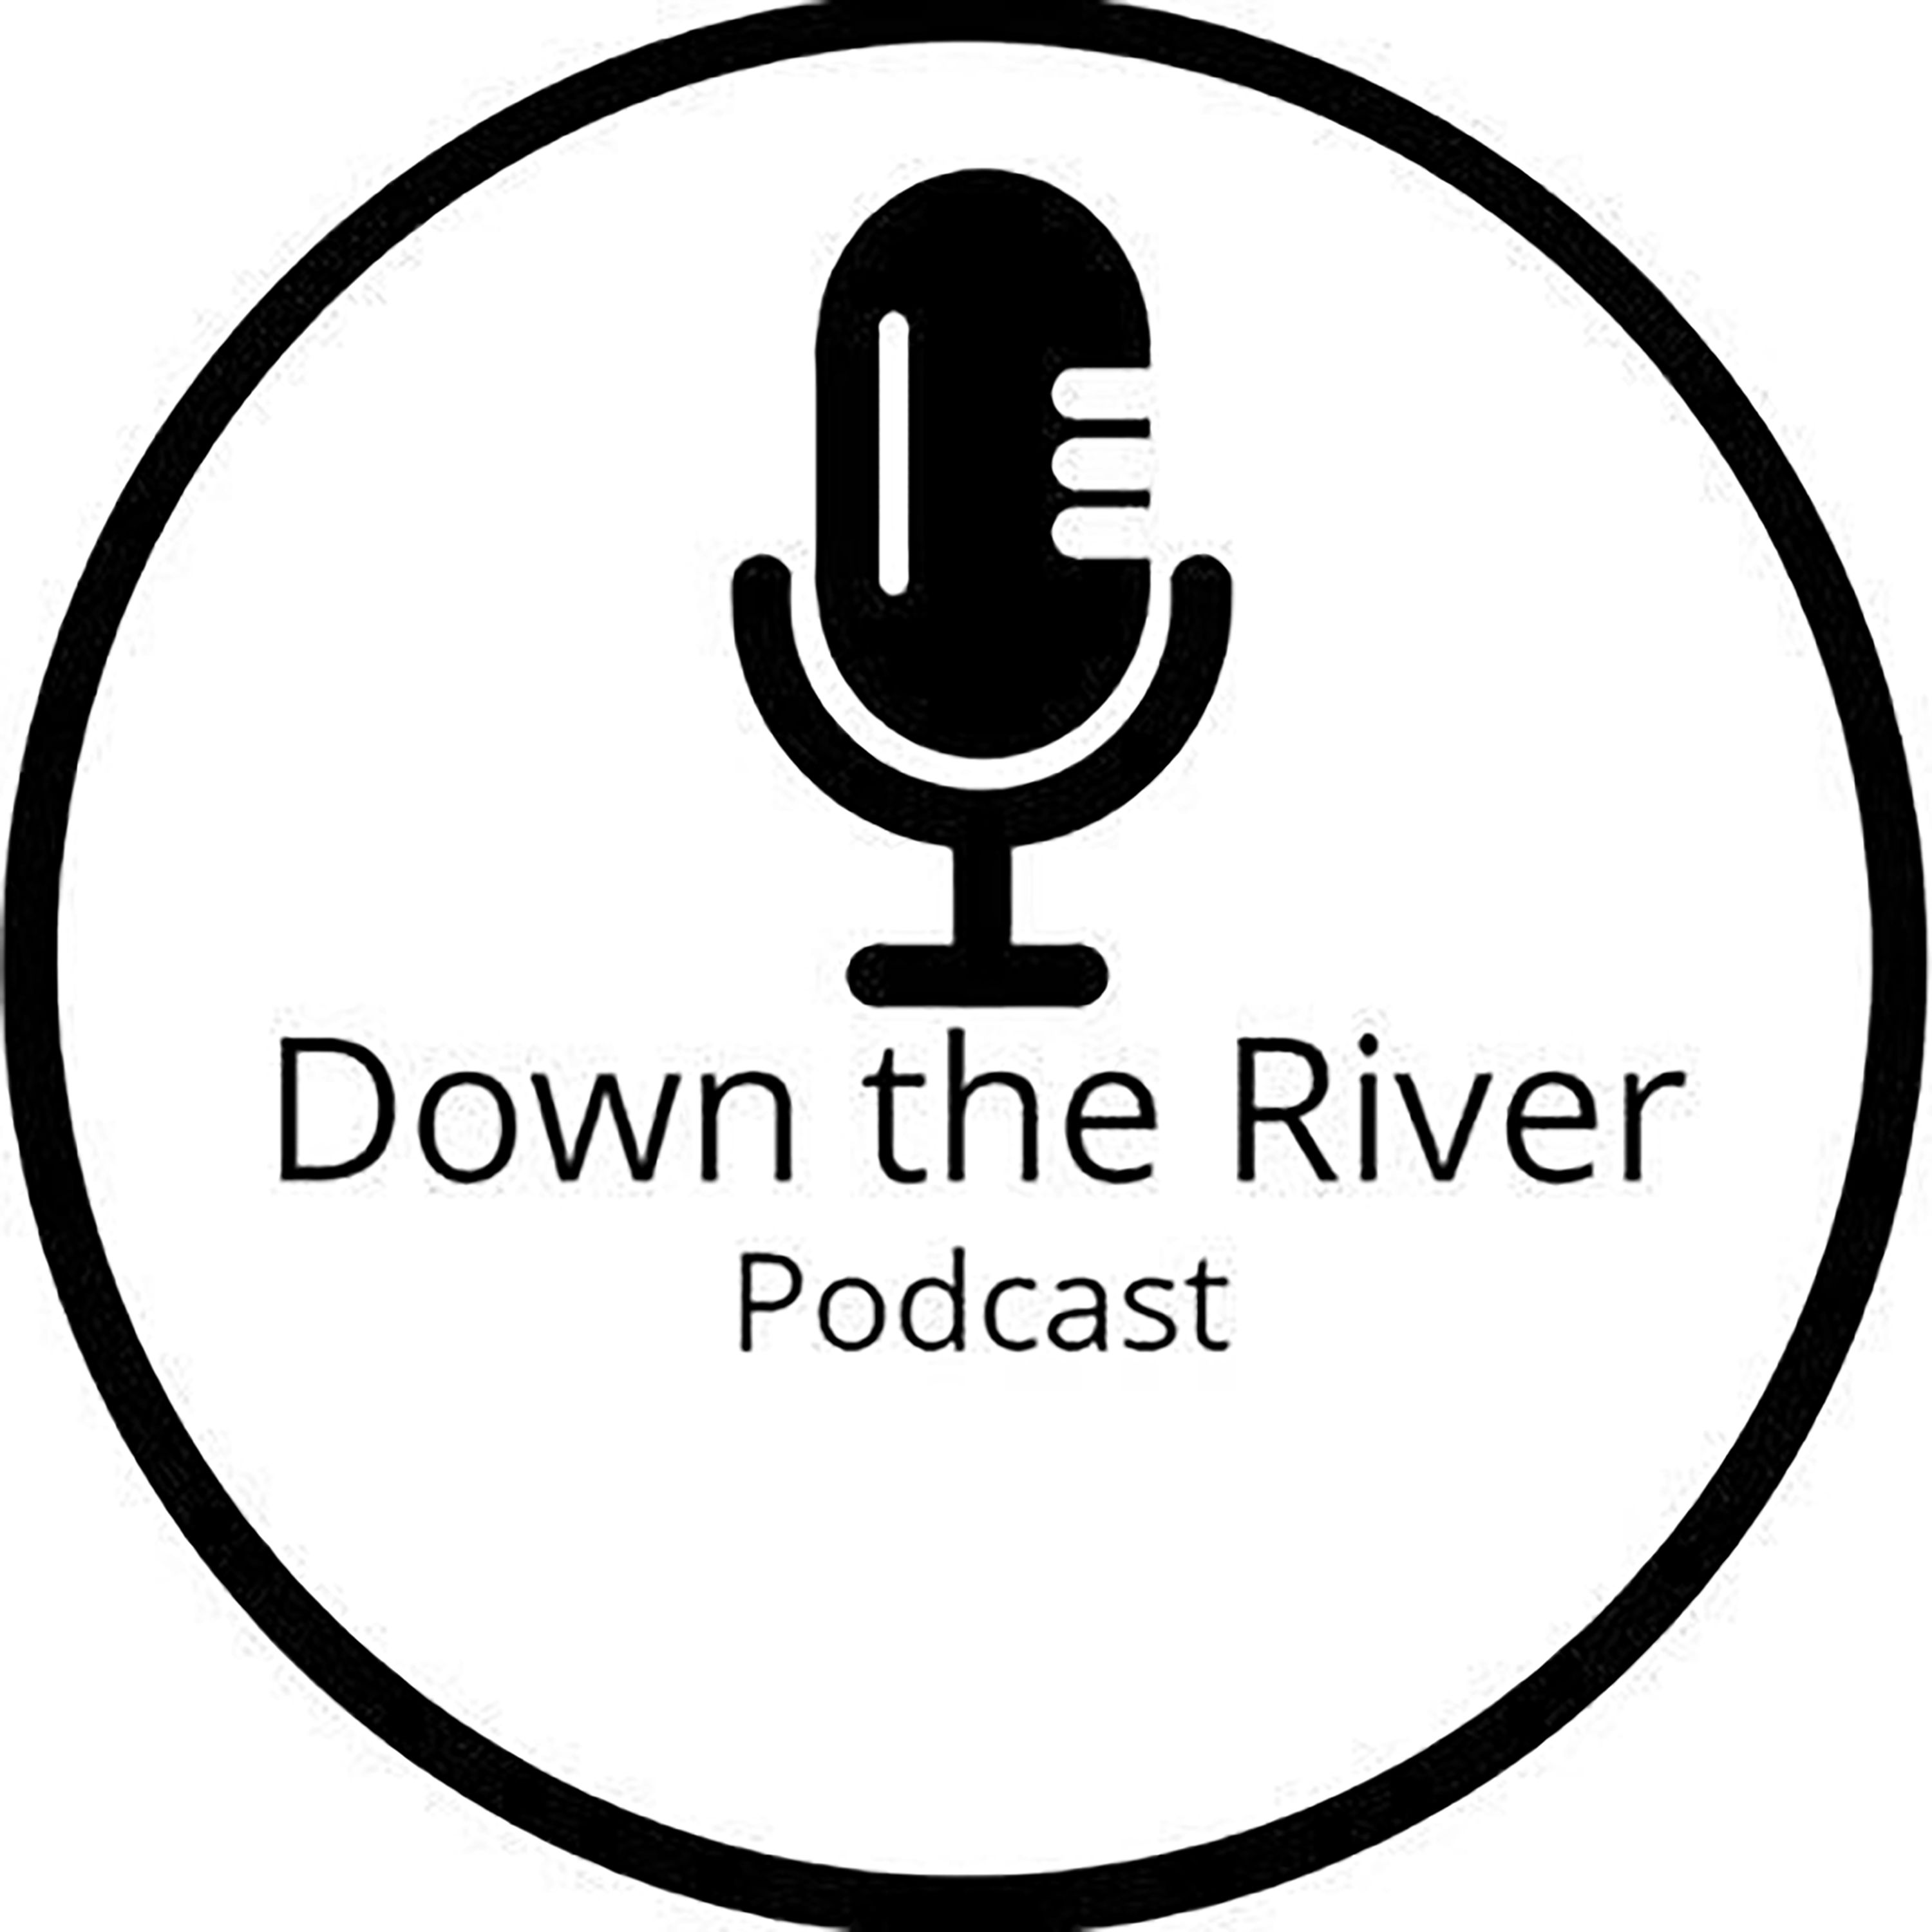 Down the River Podcast Ep. 3